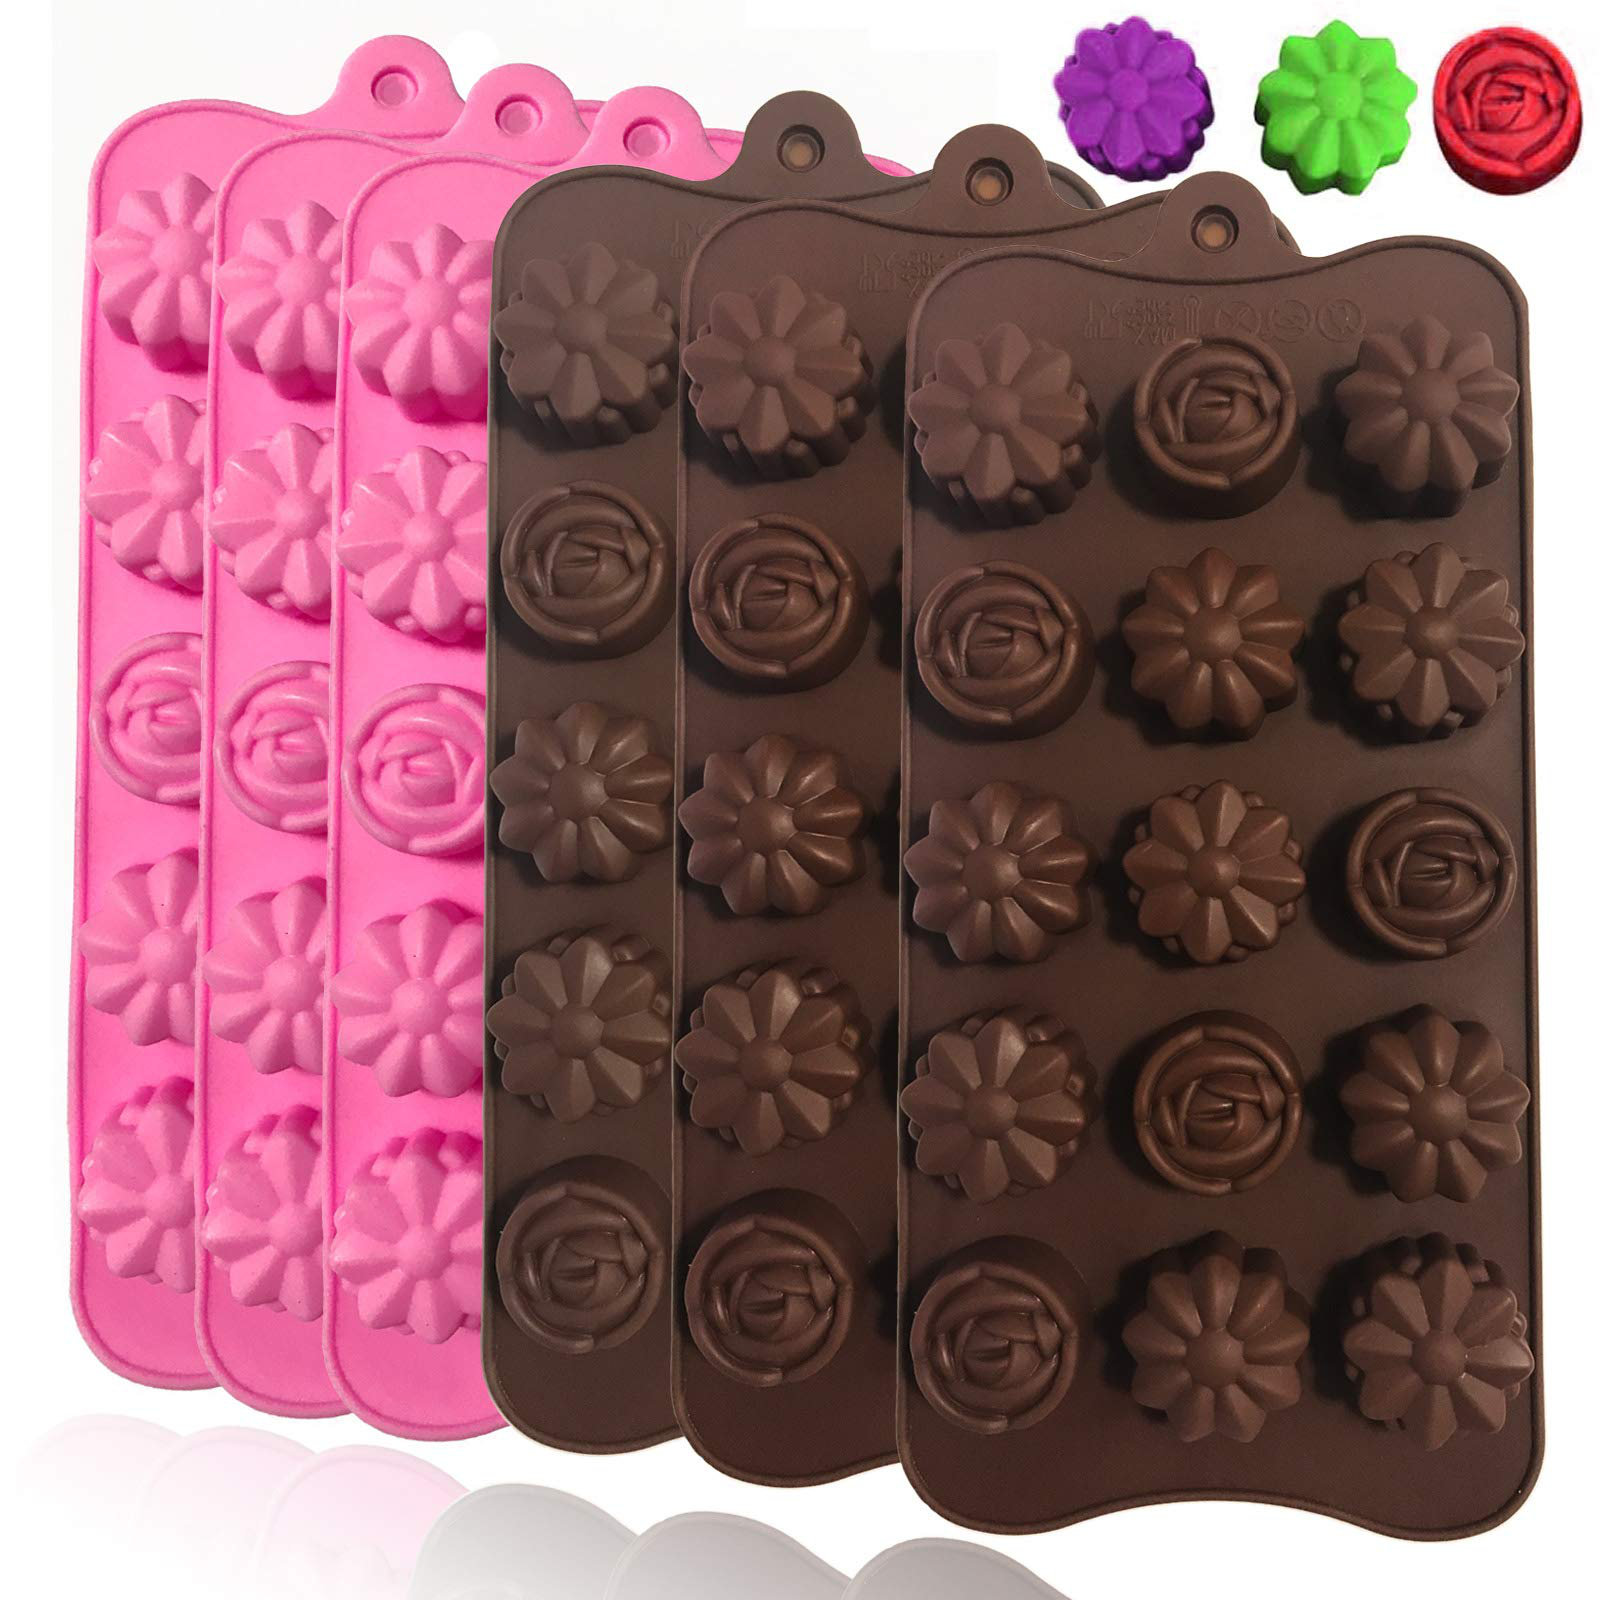 Econo Terrain 6 Pieces Flower Shape Chocolate Candy Candle Molds, 15 Cavity  Silicone Wax Soap Jello Gummy Ice Cubes Tray Baking Mould For Wedding,  Festival, Parties And DIY Crafts - Pink, Chocolate | Wayfair